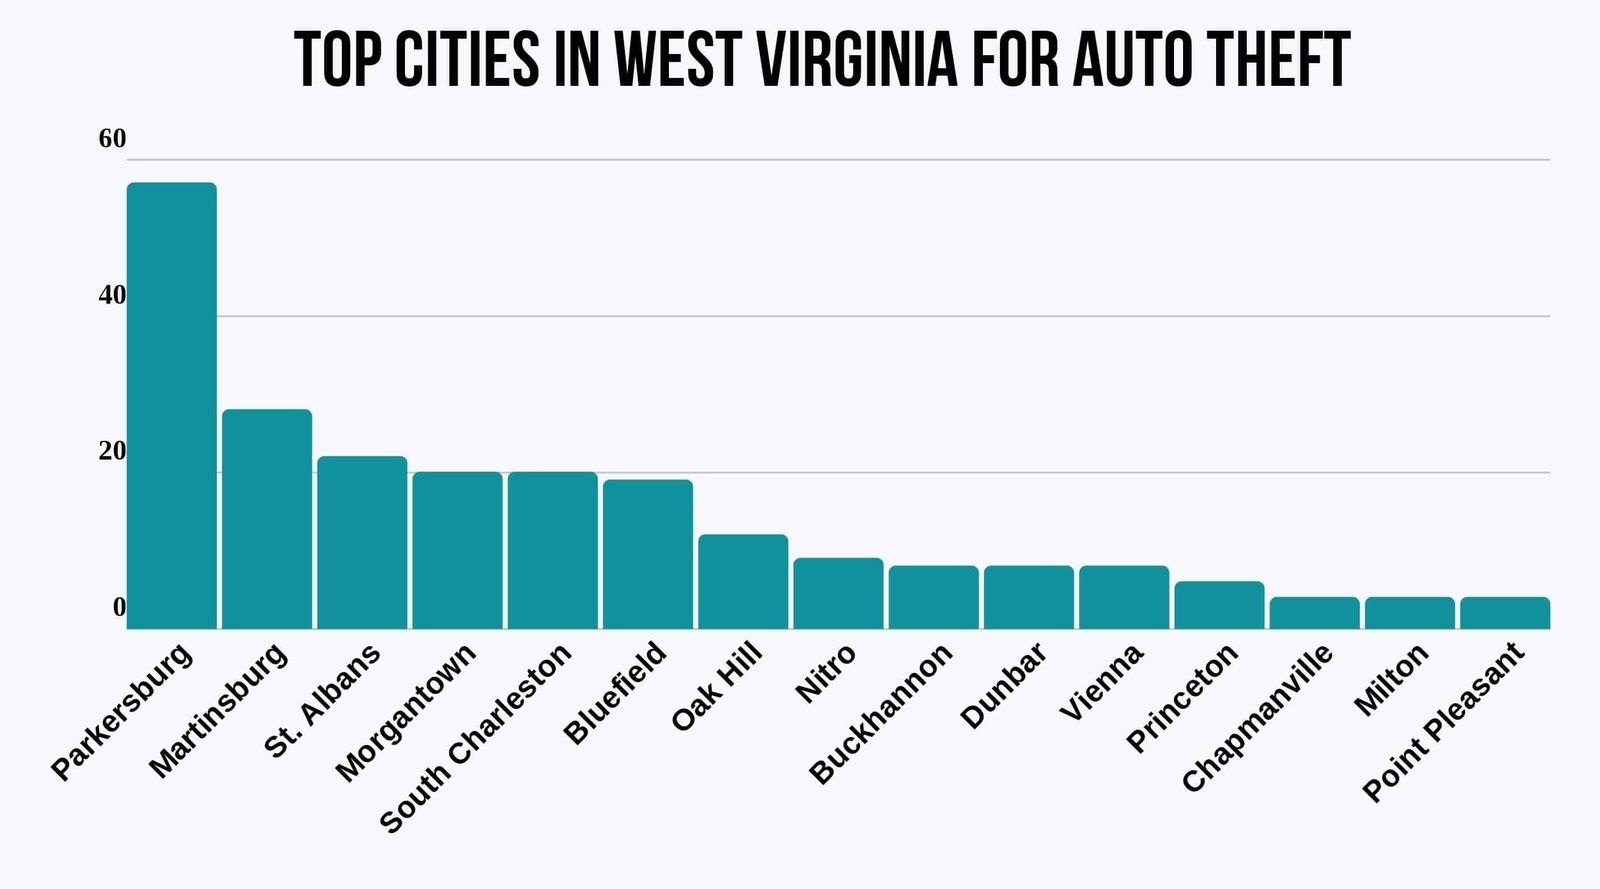 Bar graph of Top West Virginia Cities for Auto Theft